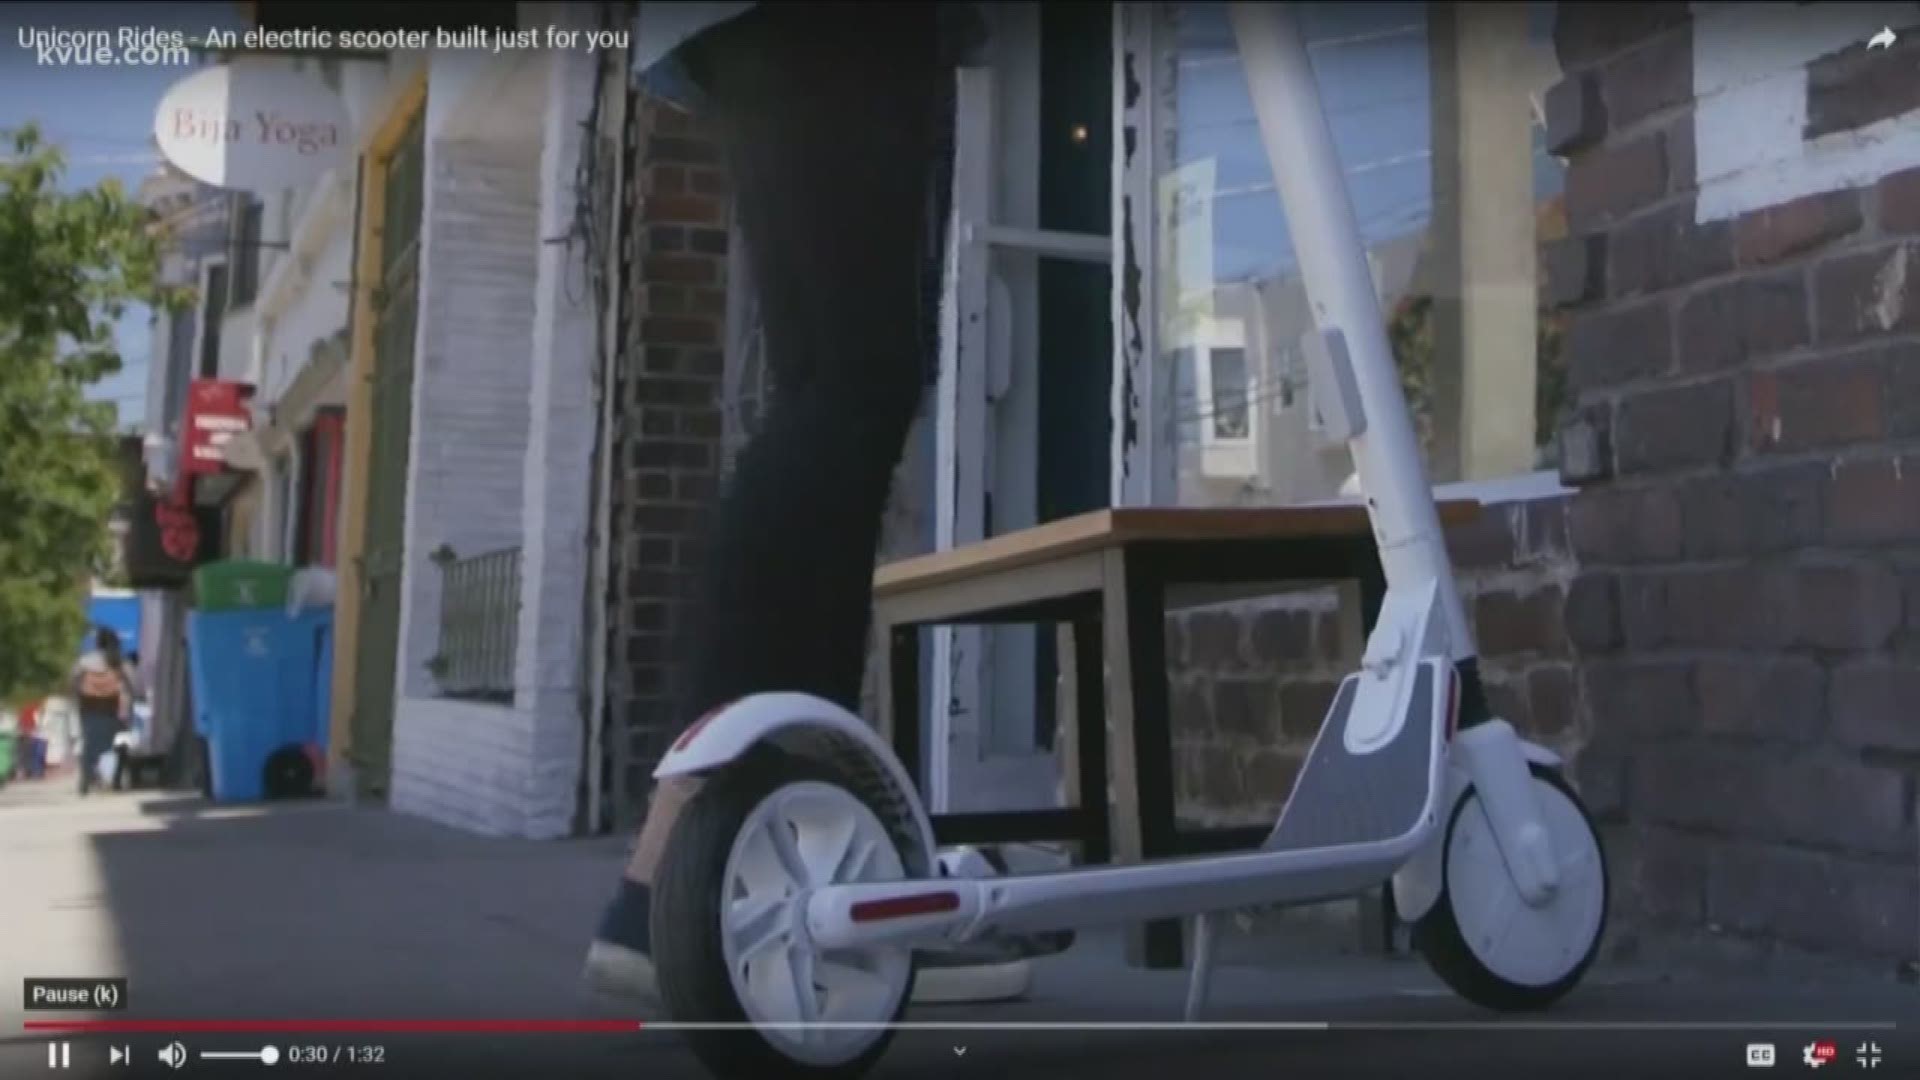 An Austin startup up is living up to its name. It's an electric scooter called Unicorn, and its scooters don't exist.